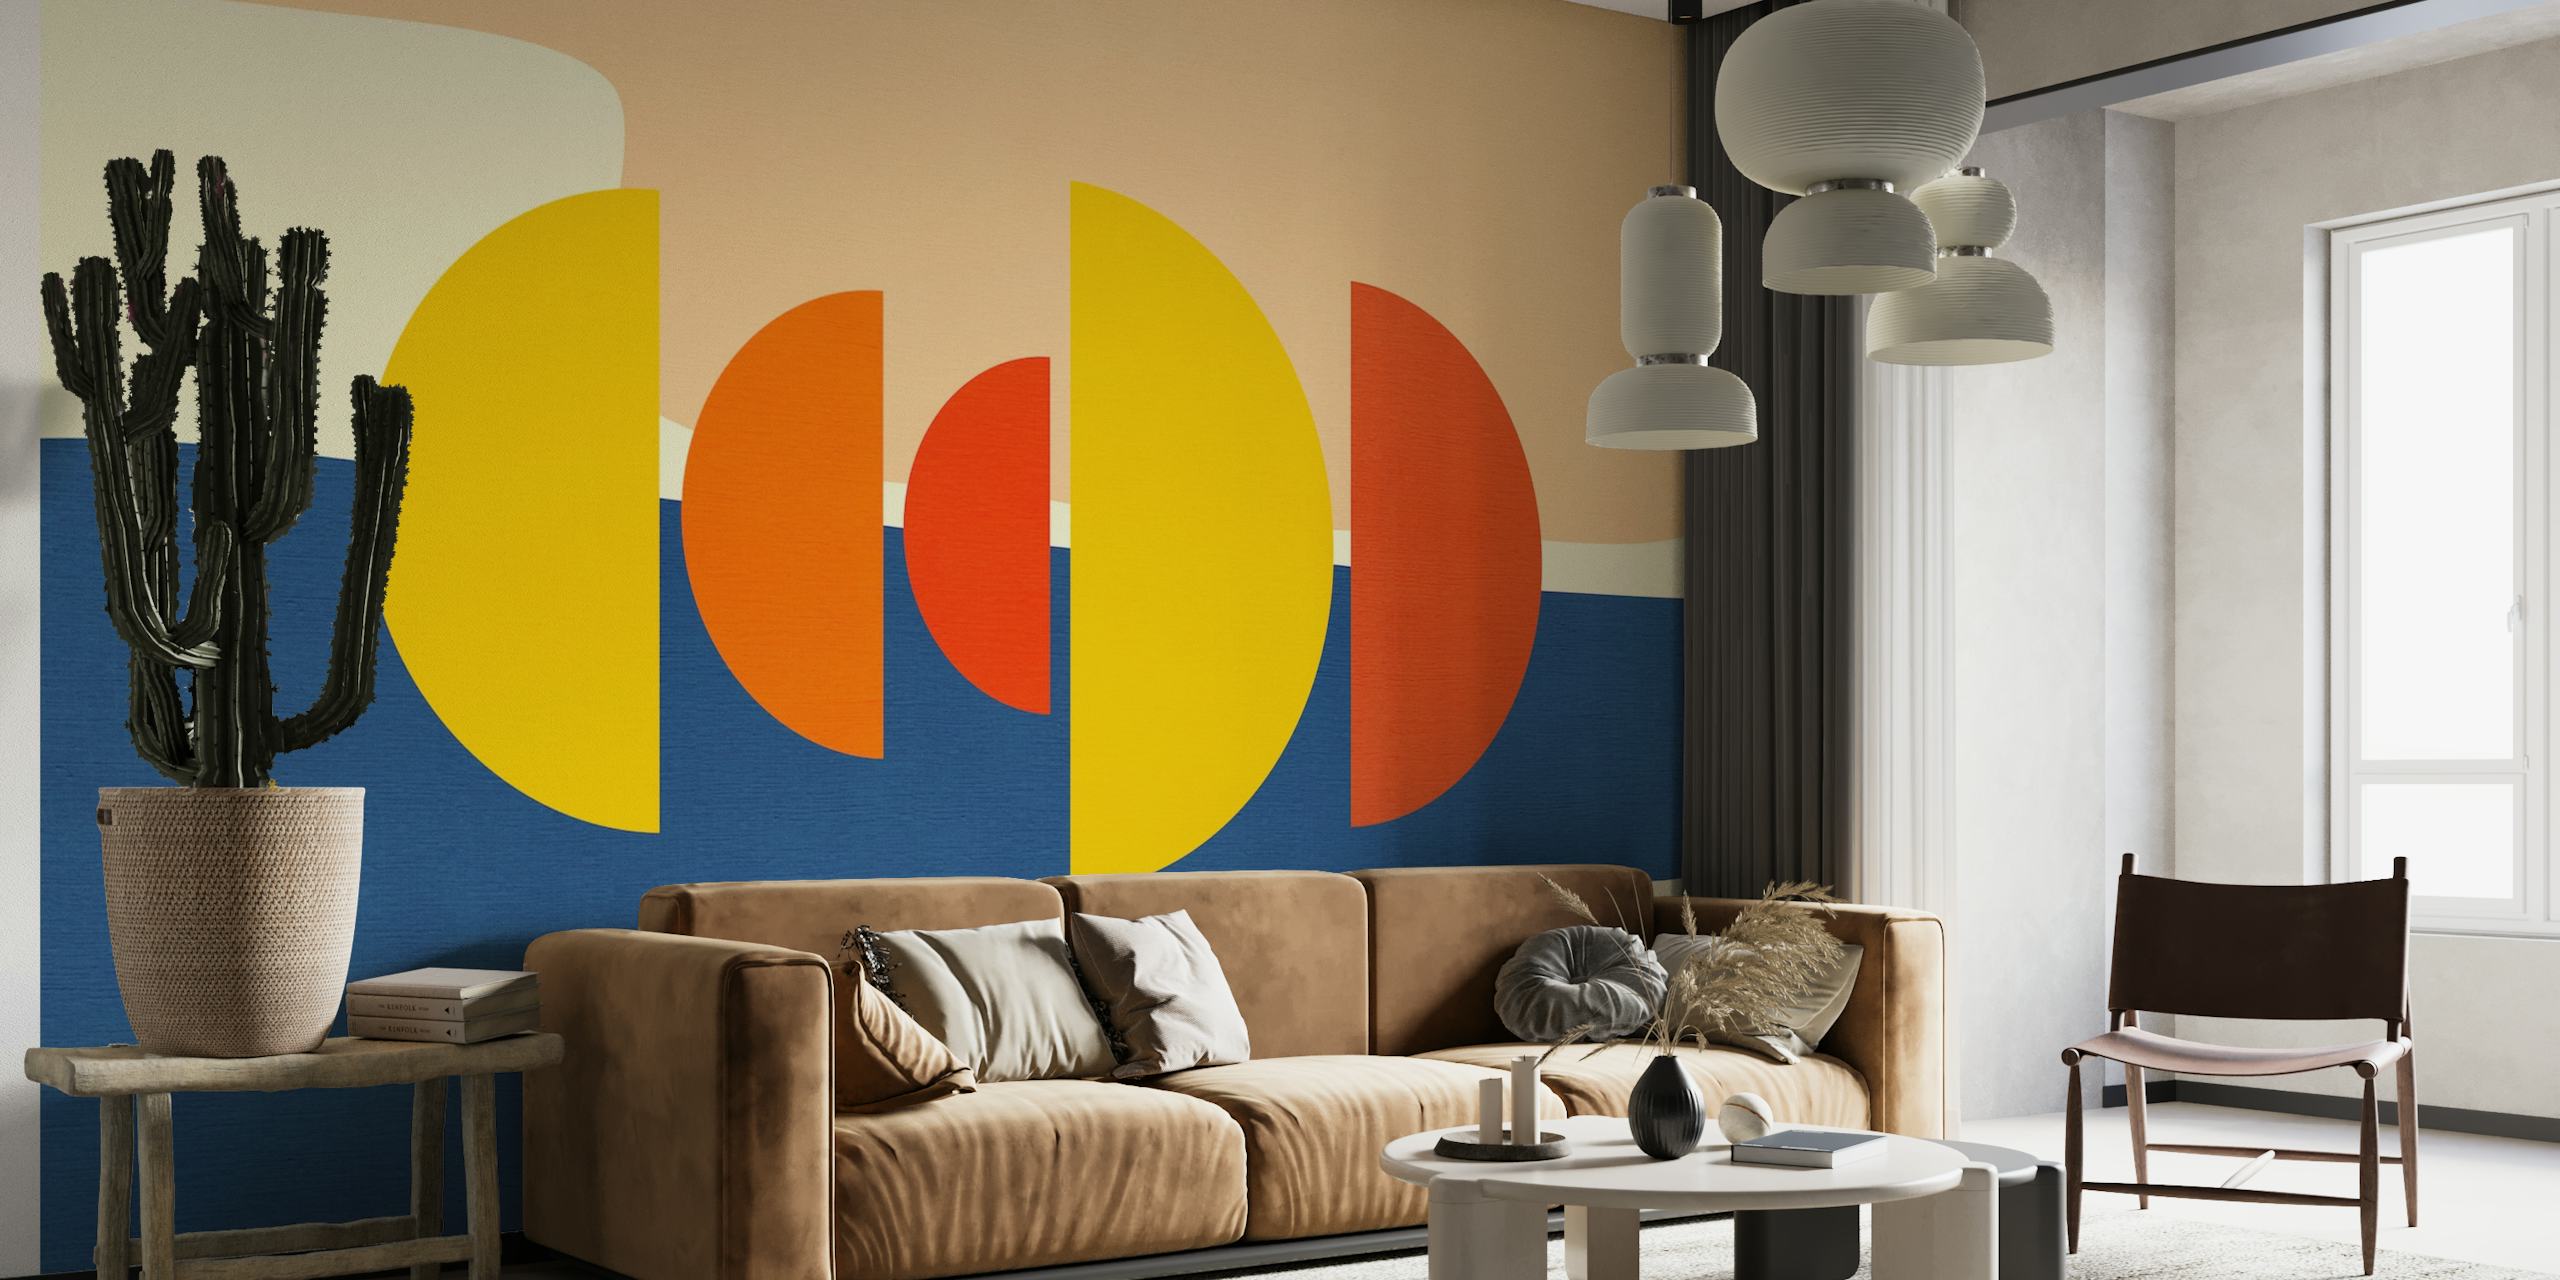 Abstract 50s style sunrise with geometric shapes in yellow, blue, and white